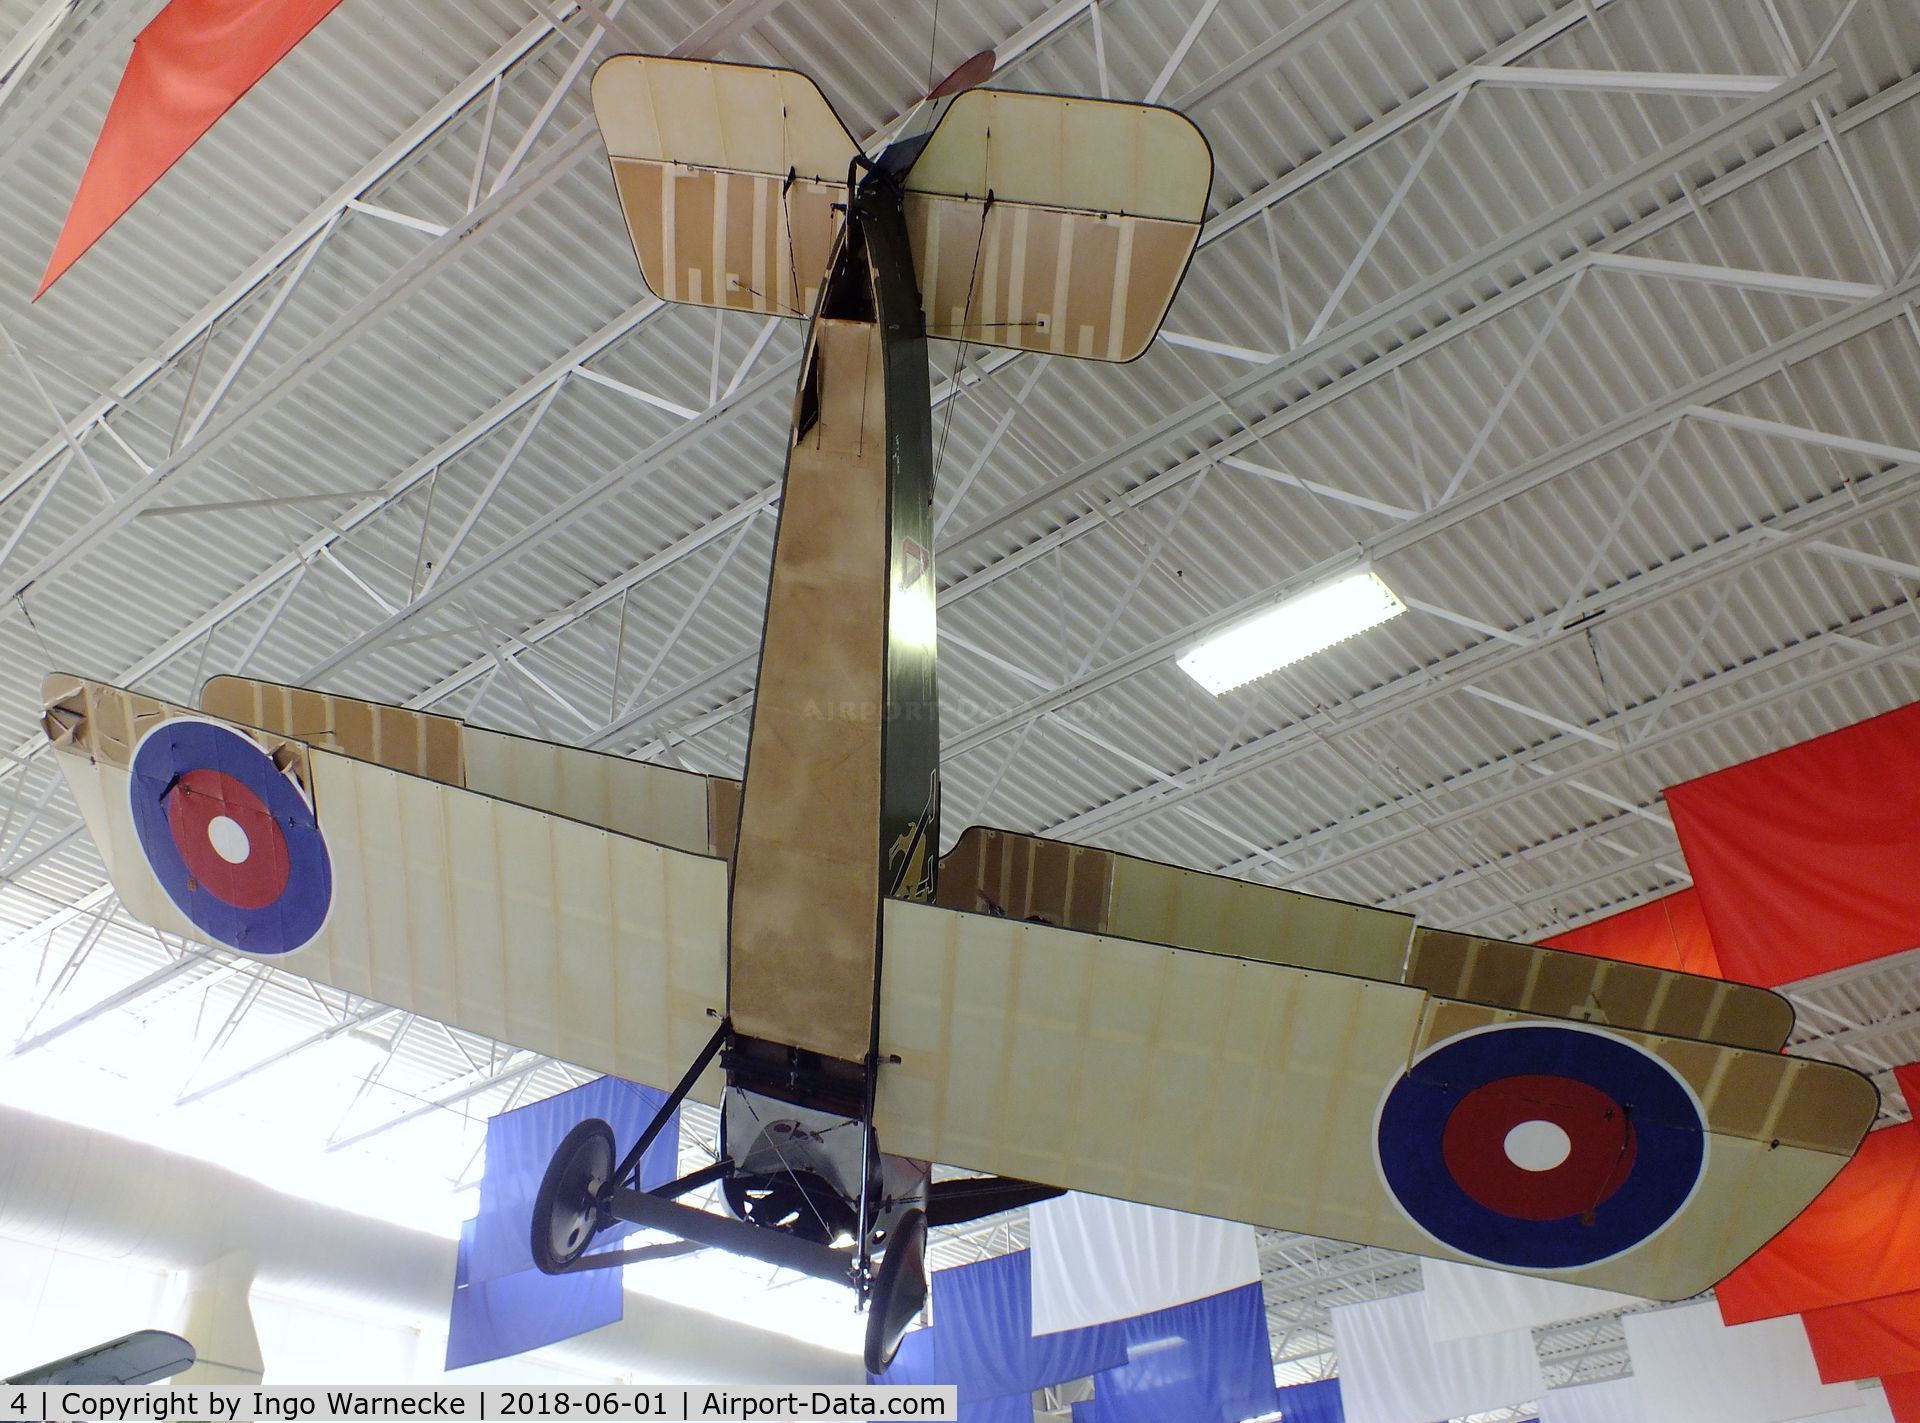 4, Sopwith F.1 Camel replica C/N unknown_4, Sopwith F.1 Camel replica at the US Army Aviation Museum, Ft. Rucker